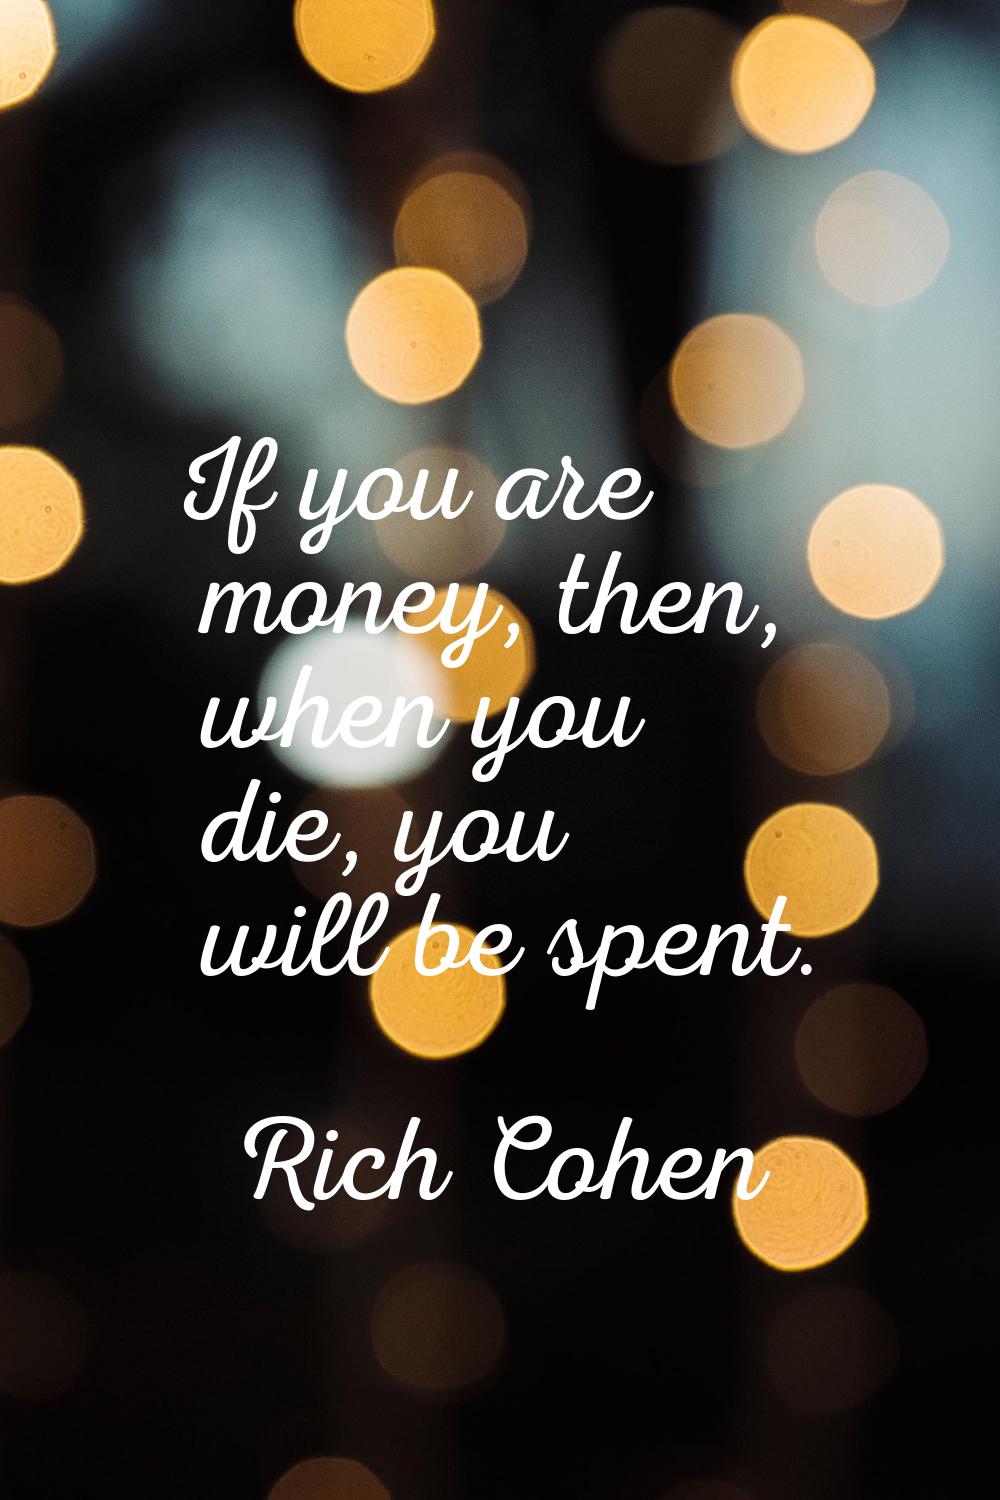 If you are money, then, when you die, you will be spent.